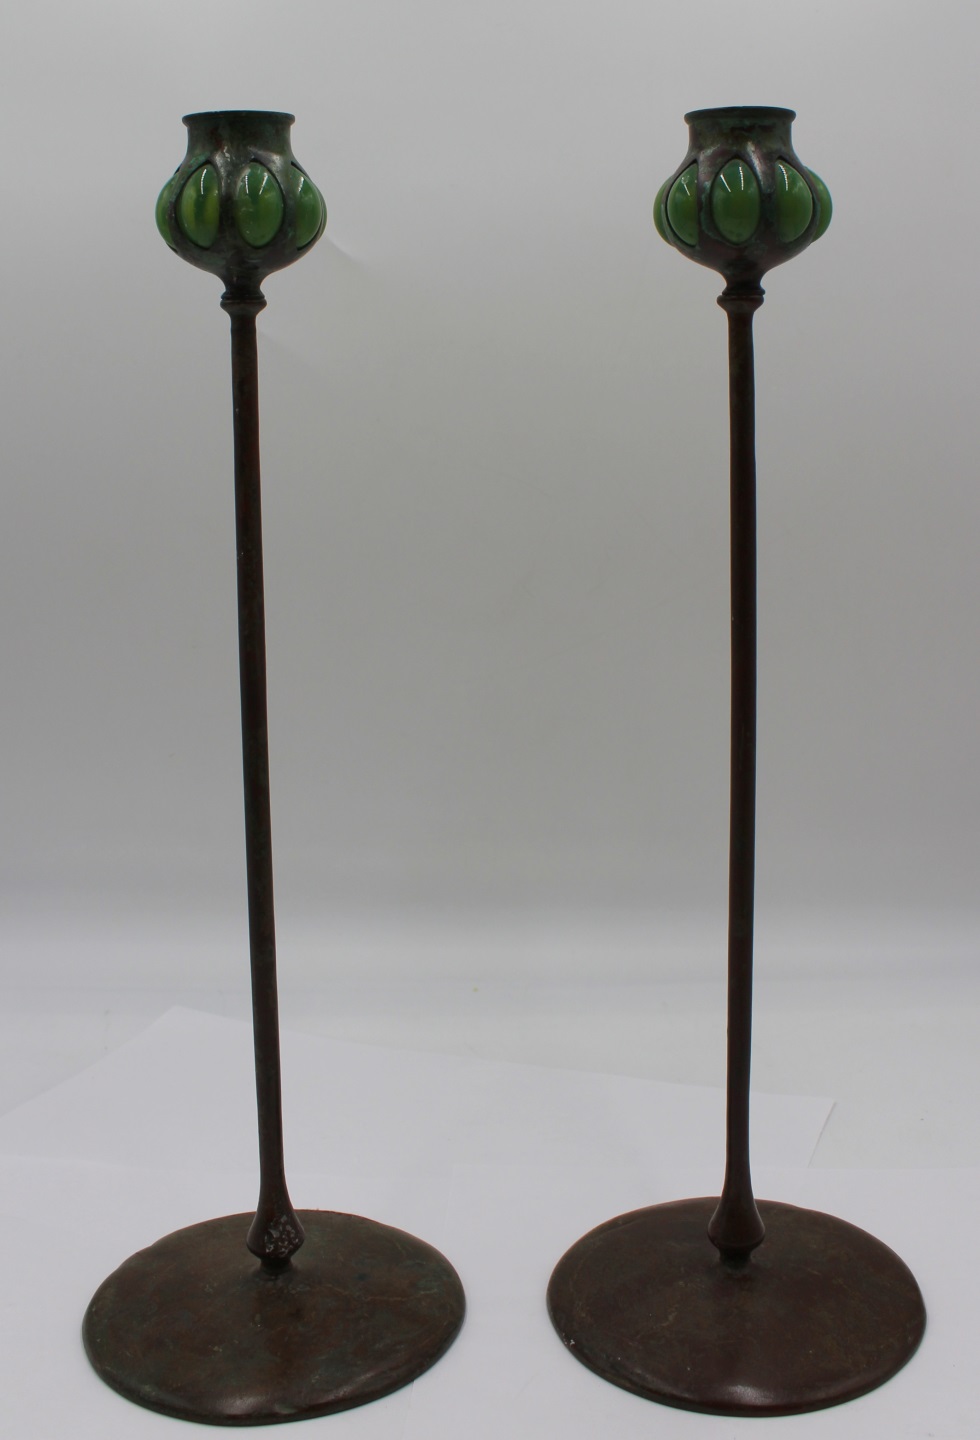 A PAIR OF BRONZE TIFFANY STYLE